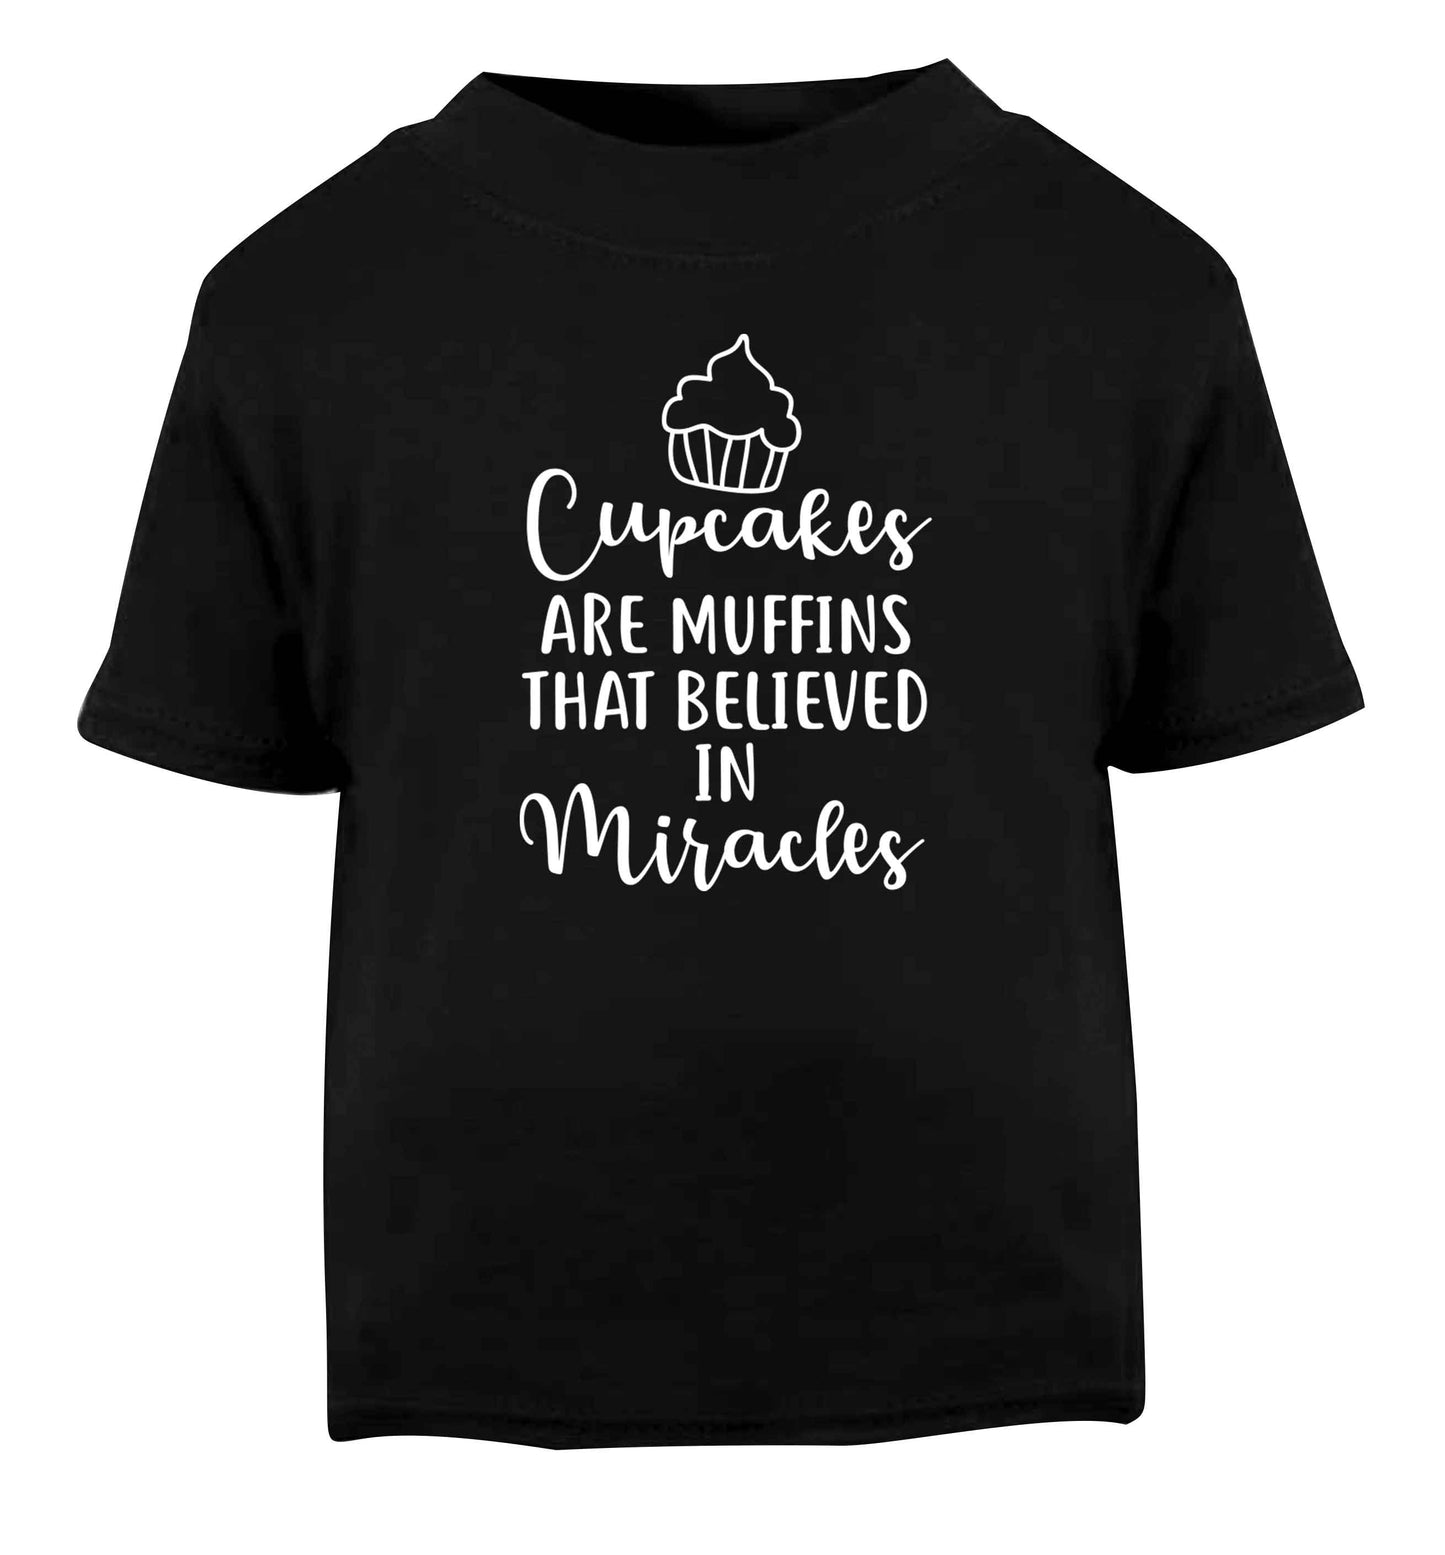 Cupcakes muffins that believed in miracles Black Baby Toddler Tshirt 2 years